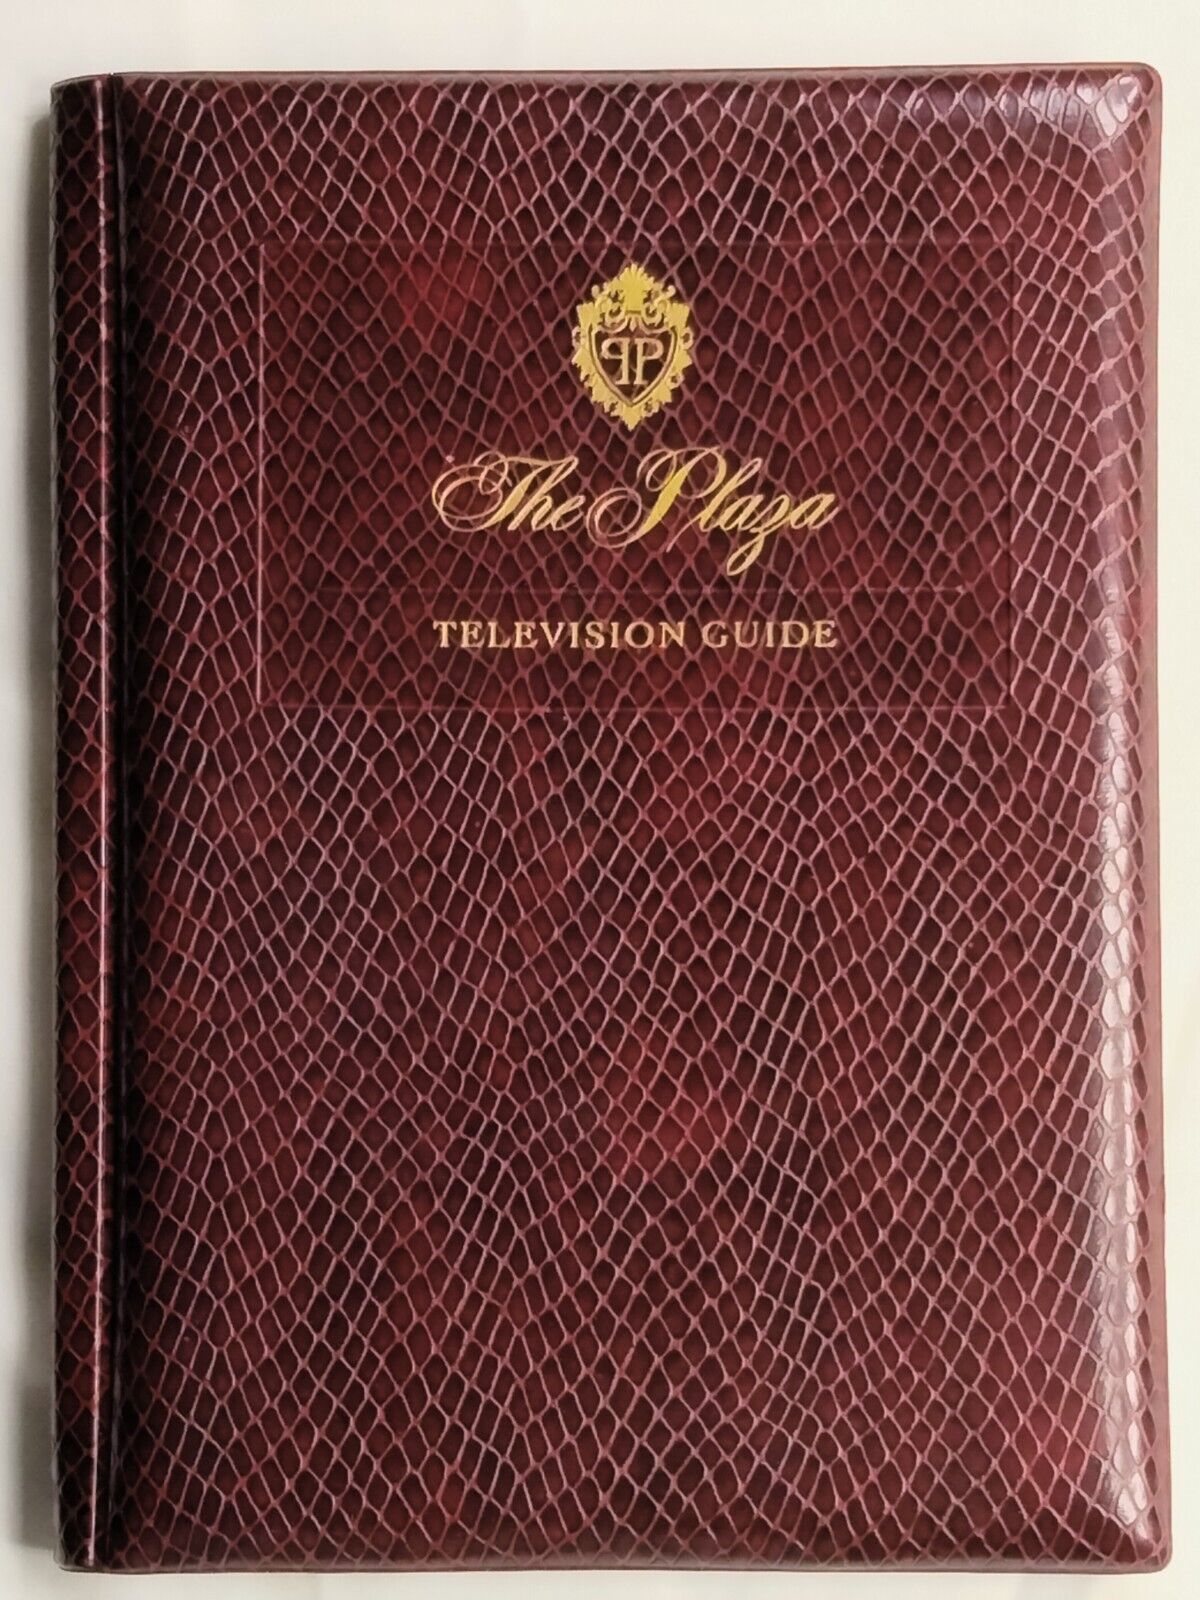 The Plaza Hotel New York City Guest Television Guide Folder with Insert Complete